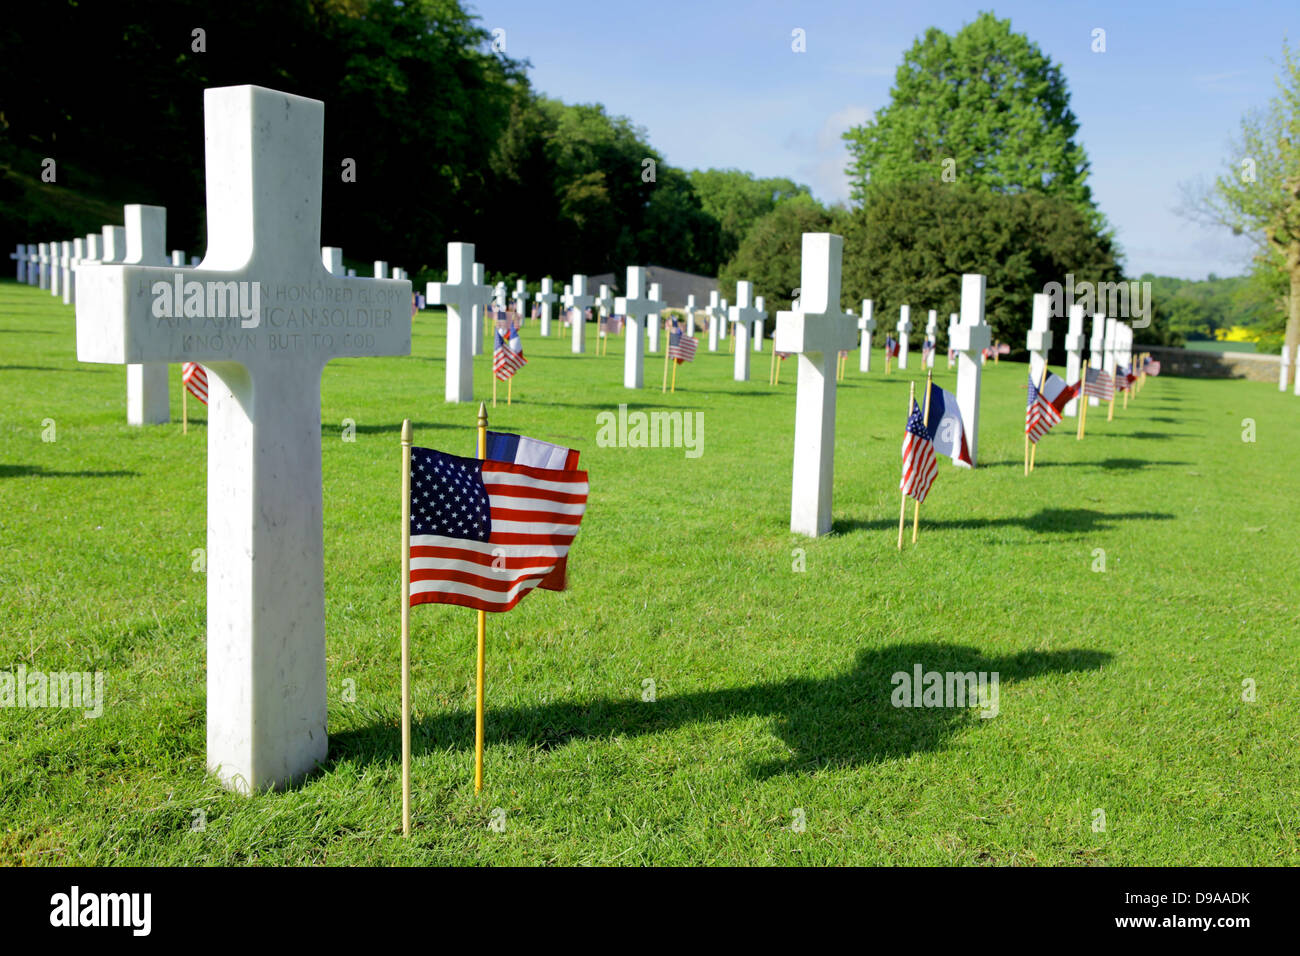 American flags mark the graves of US soldiers killed in the historic First World War battlefield of Belleau Wood in honor of Memorial Day at the Aisne-Marne American Cemetery May 28, 2013 in Belleau, France. Stock Photo